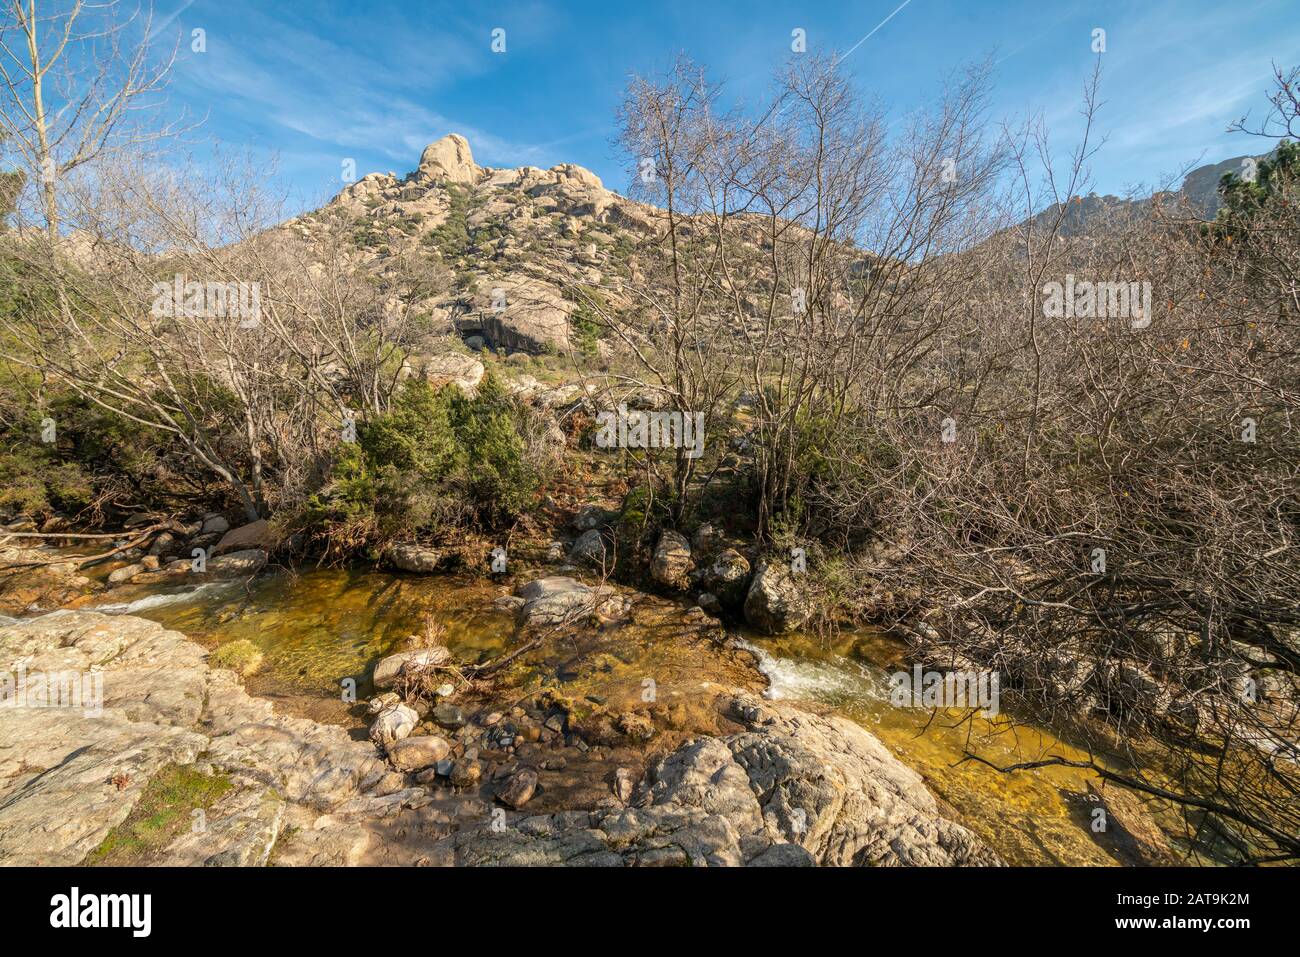 Amazing forest view with the trees, Manzanares river and in far distance the rugged granite mountains of La Pedriza area inside Sierra de Guadarrama Stock Photo